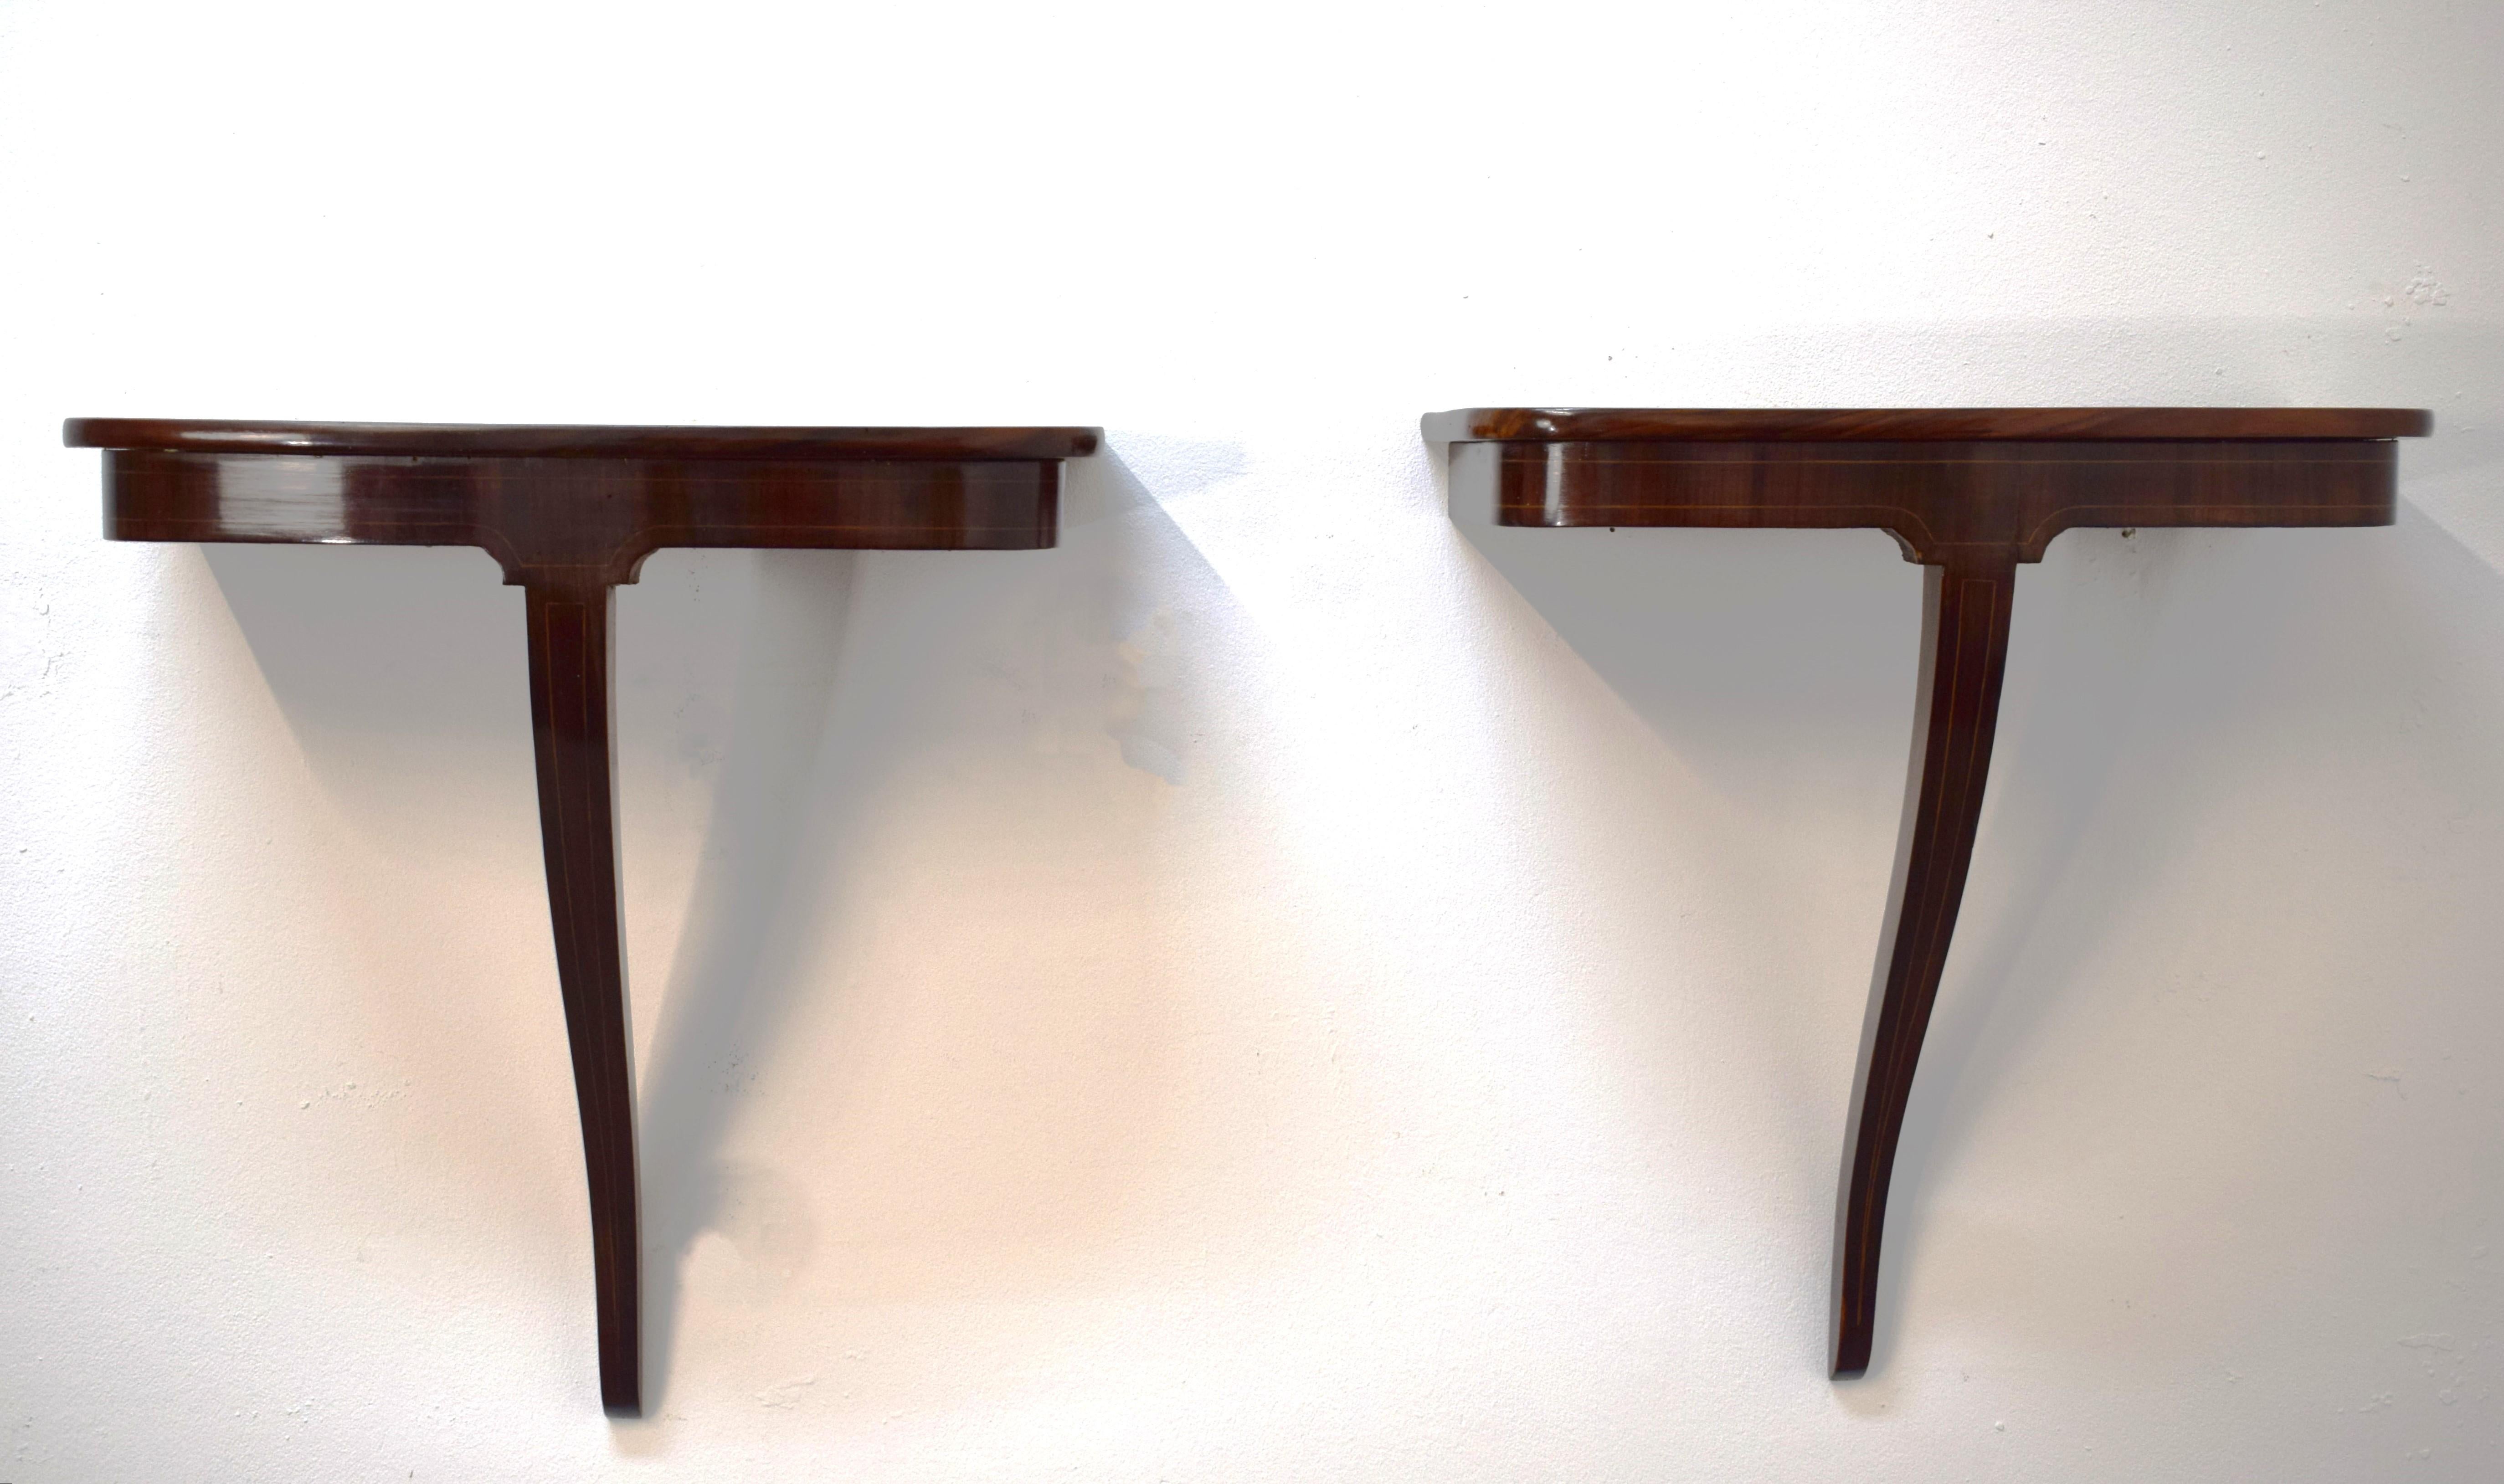 Pair of italian wall consolle by Paolo Buffa, 1950s.
Dimensions: H= 60 cm; W= 56 cm;  D= 25 cm.